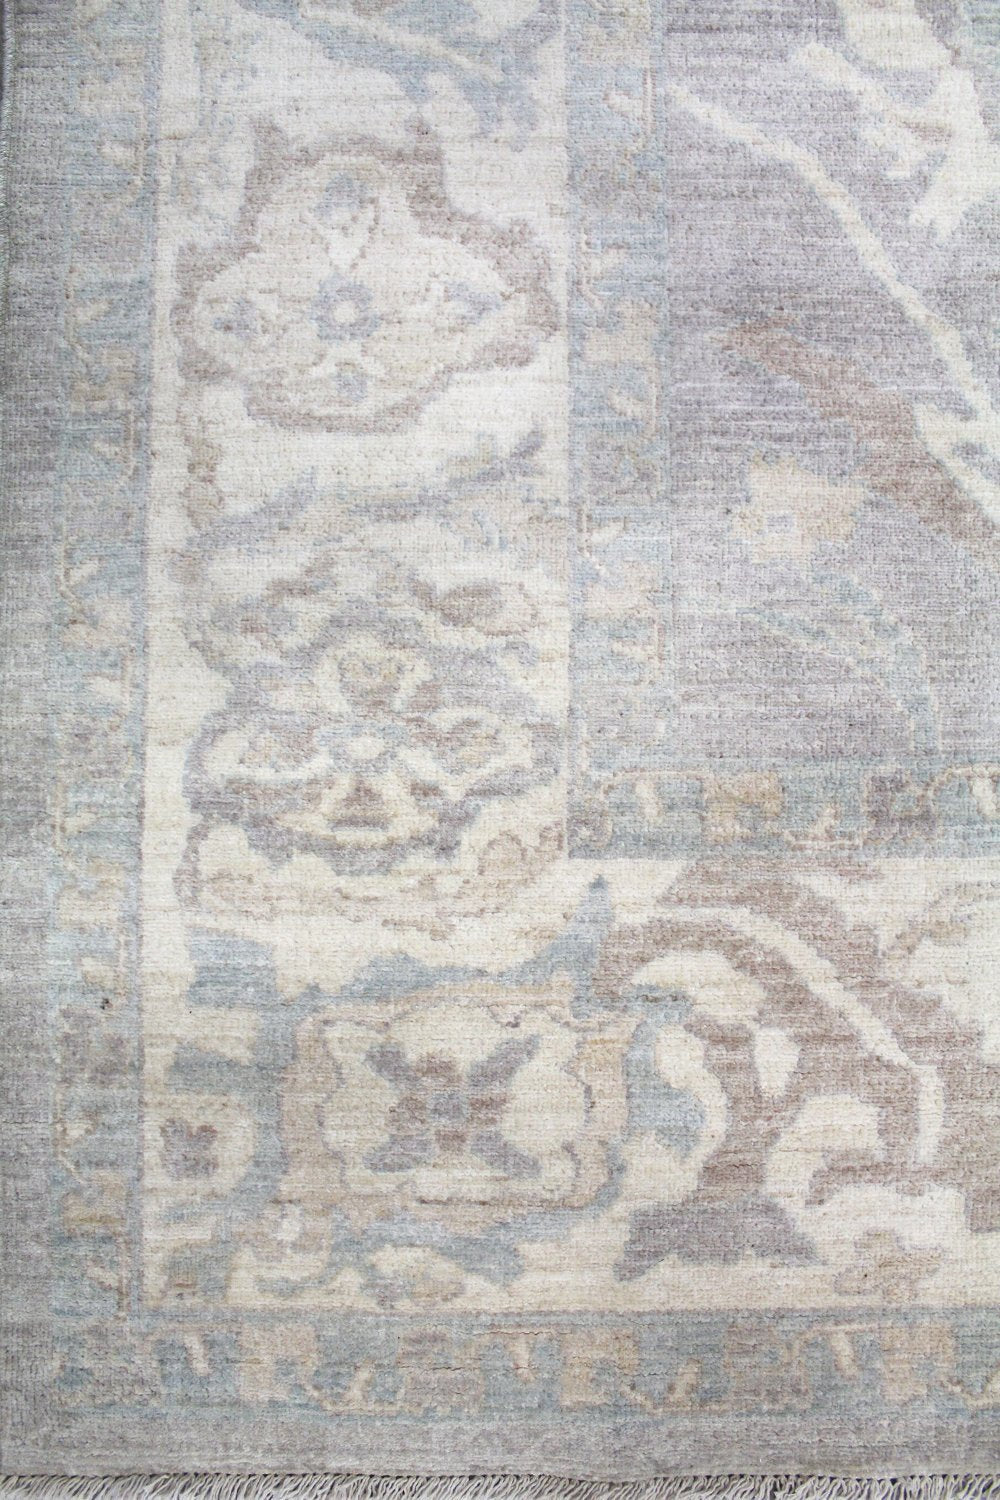 Sultanabad Handwoven Transitional Rug, J61276